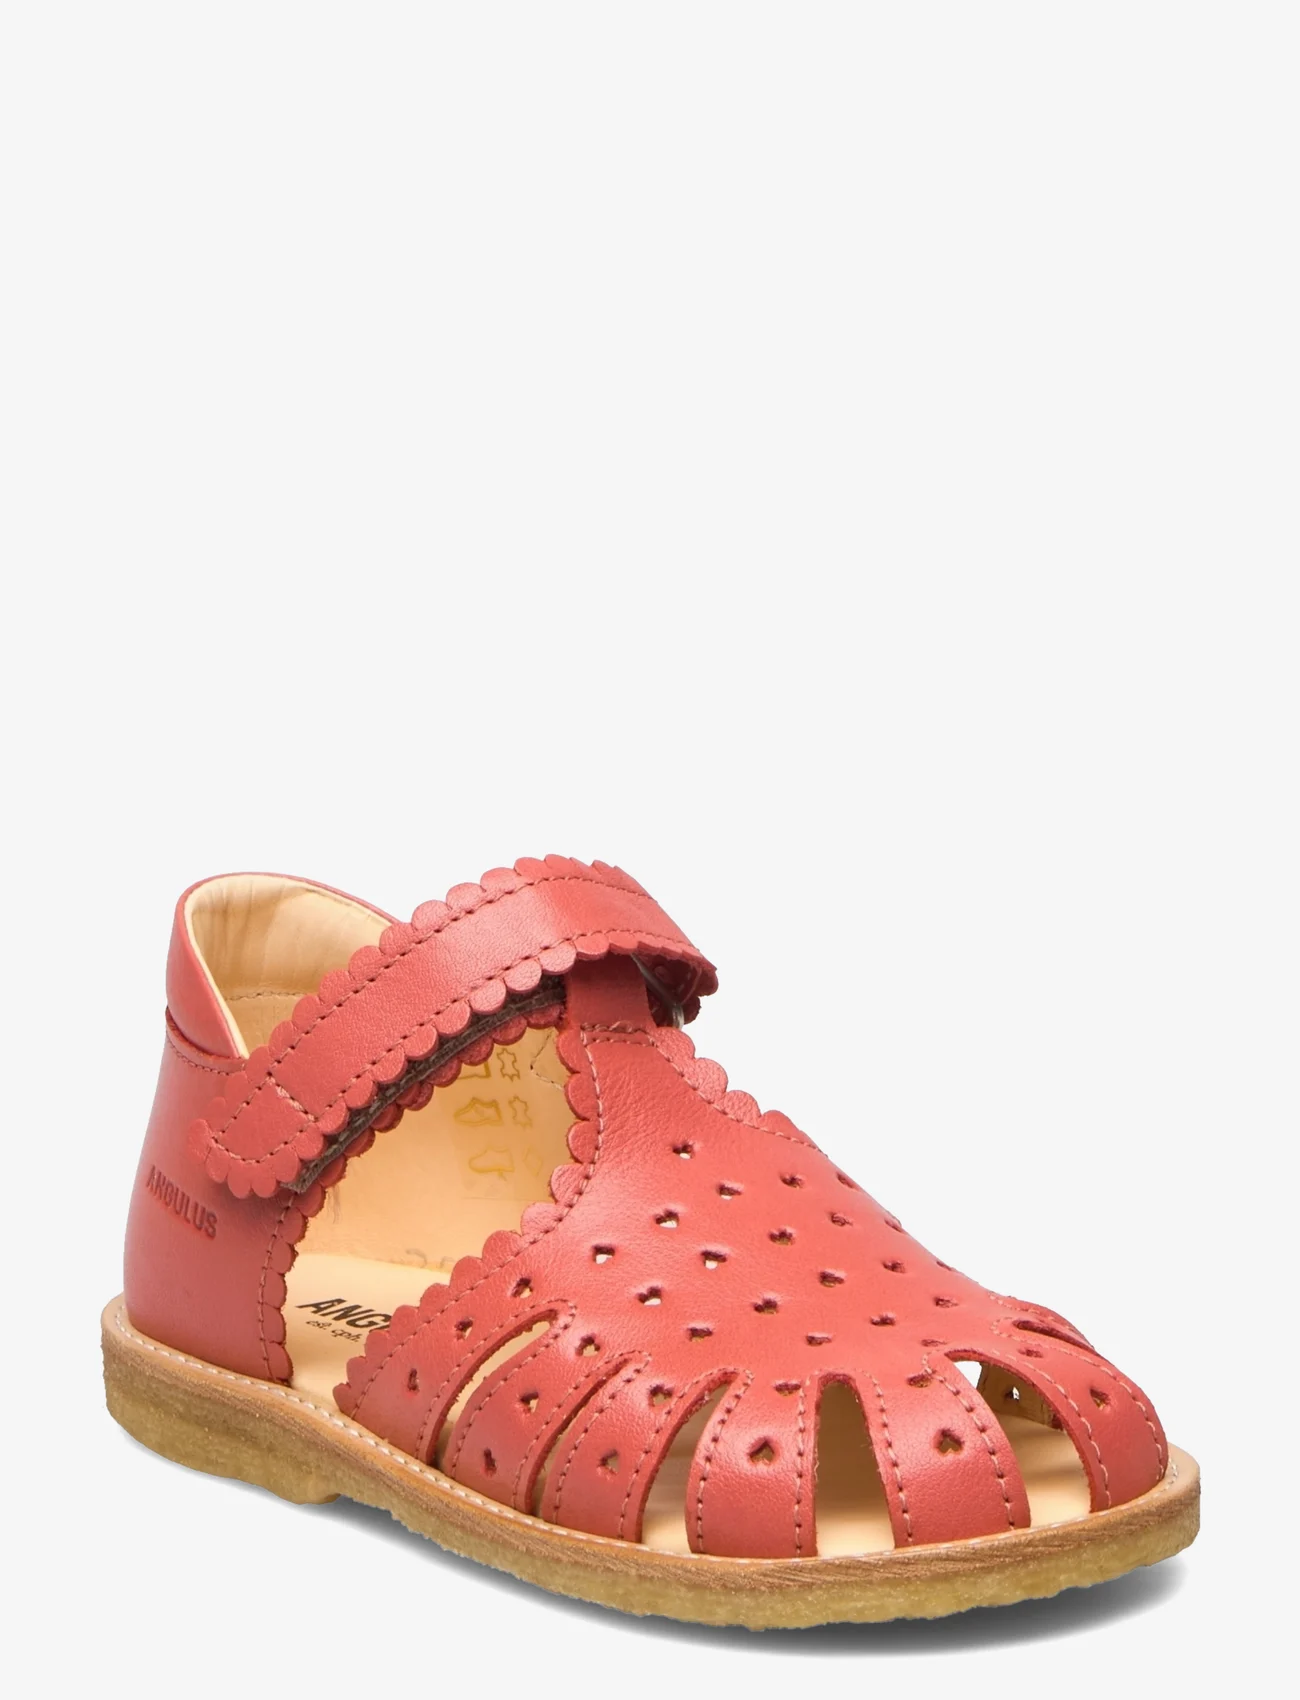 ANGULUS - Sandals - flat - closed toe - - sommerschnäppchen - 1591 coral - 0